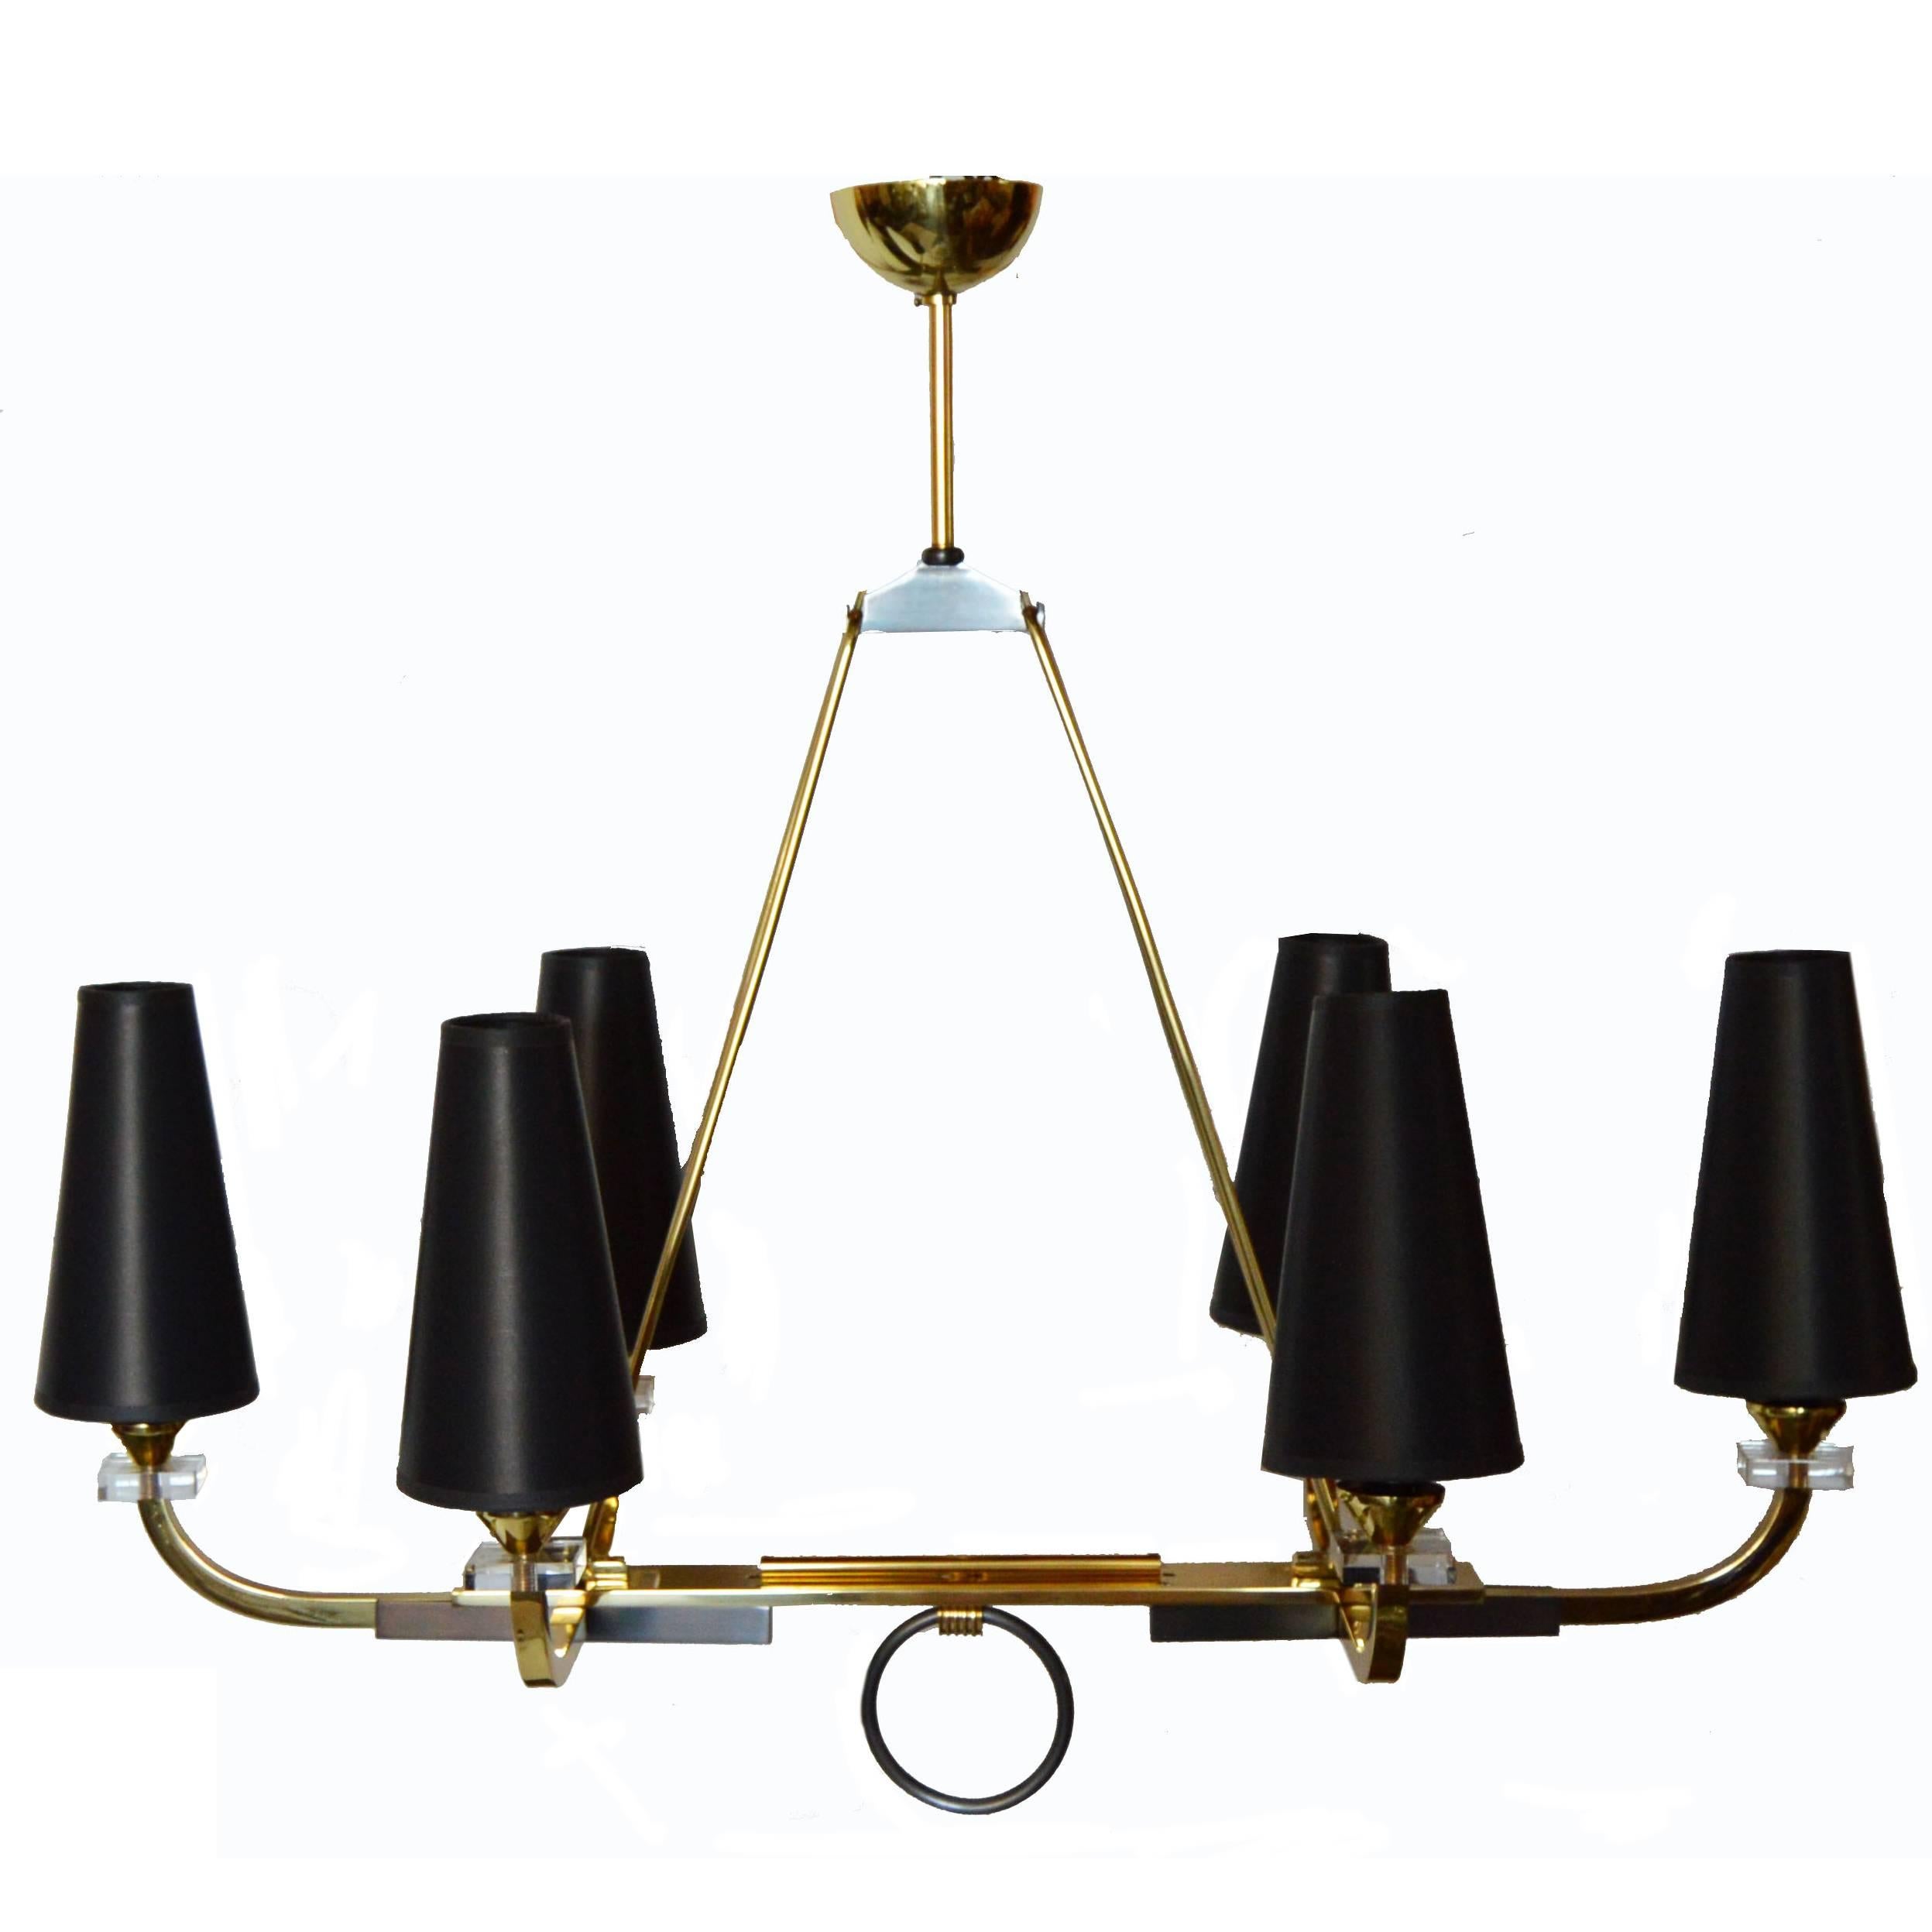 Jacques Adnet Six-Light Chandelier, pair available